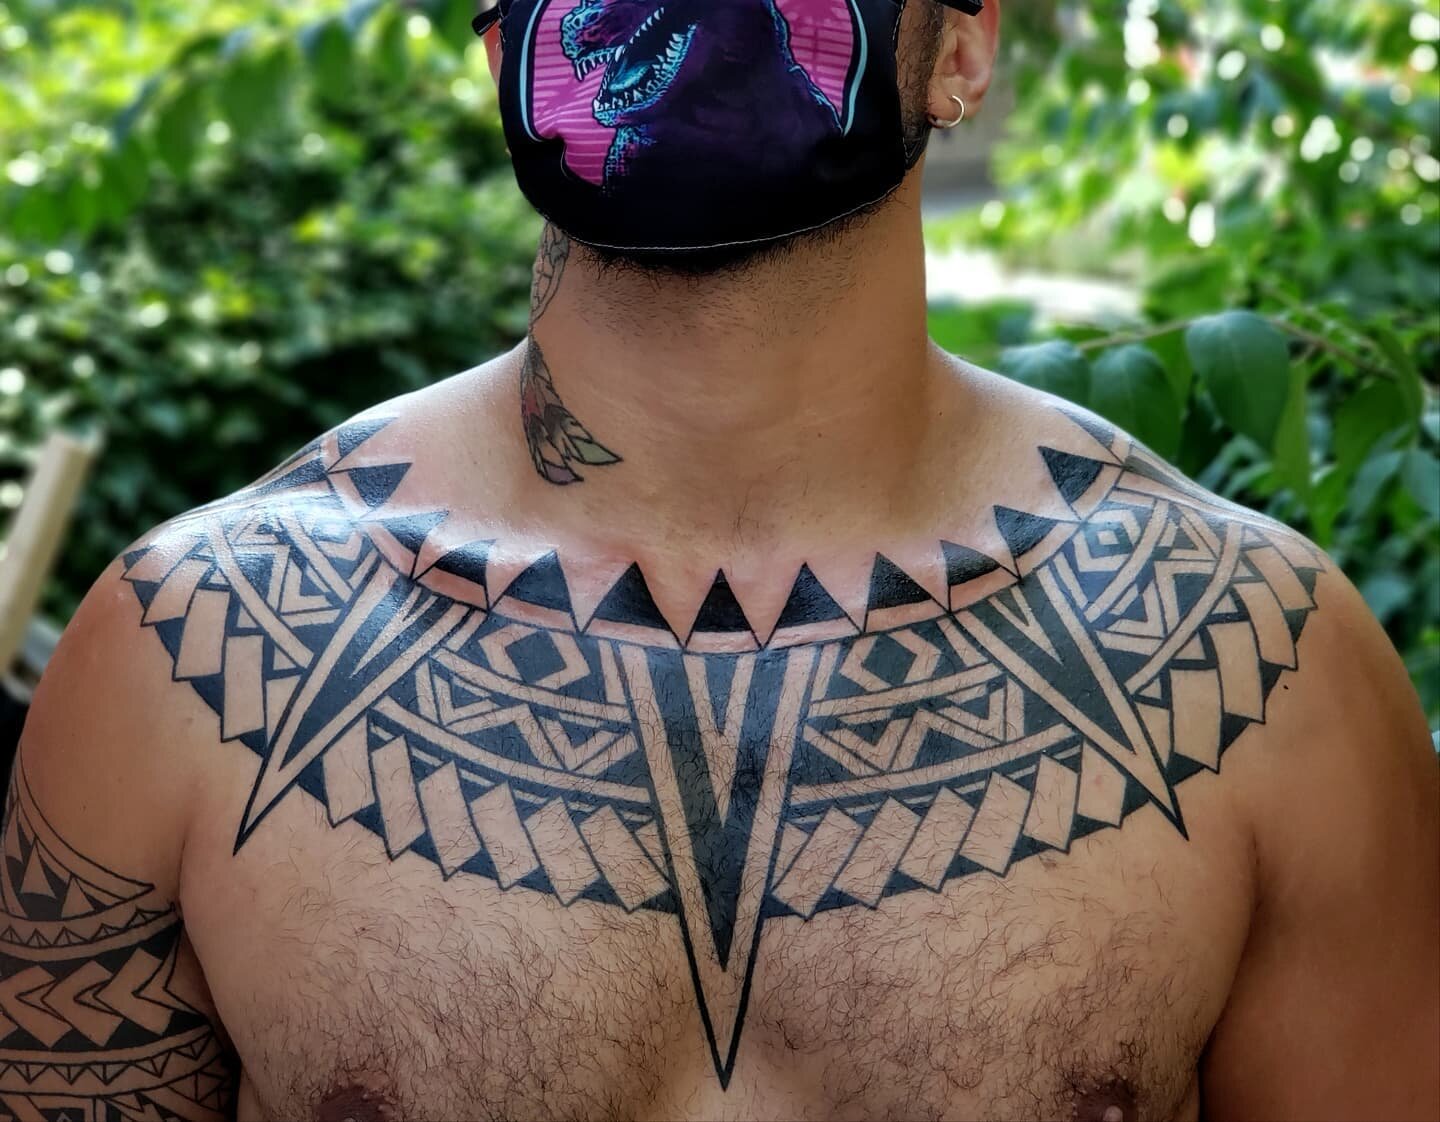 Finished Norm's collar tattoo a few days ago. All freehand, no stencils needed. Thanks for your trust and dedication @normancyr 
.
.
.
.
.
.
.
.
.
.
.
.
.
.
.
.
.
.
#tattoo #tribaltattoo #tribal #tattoos #michigan #kerrytown #annarbor #blackworkers #